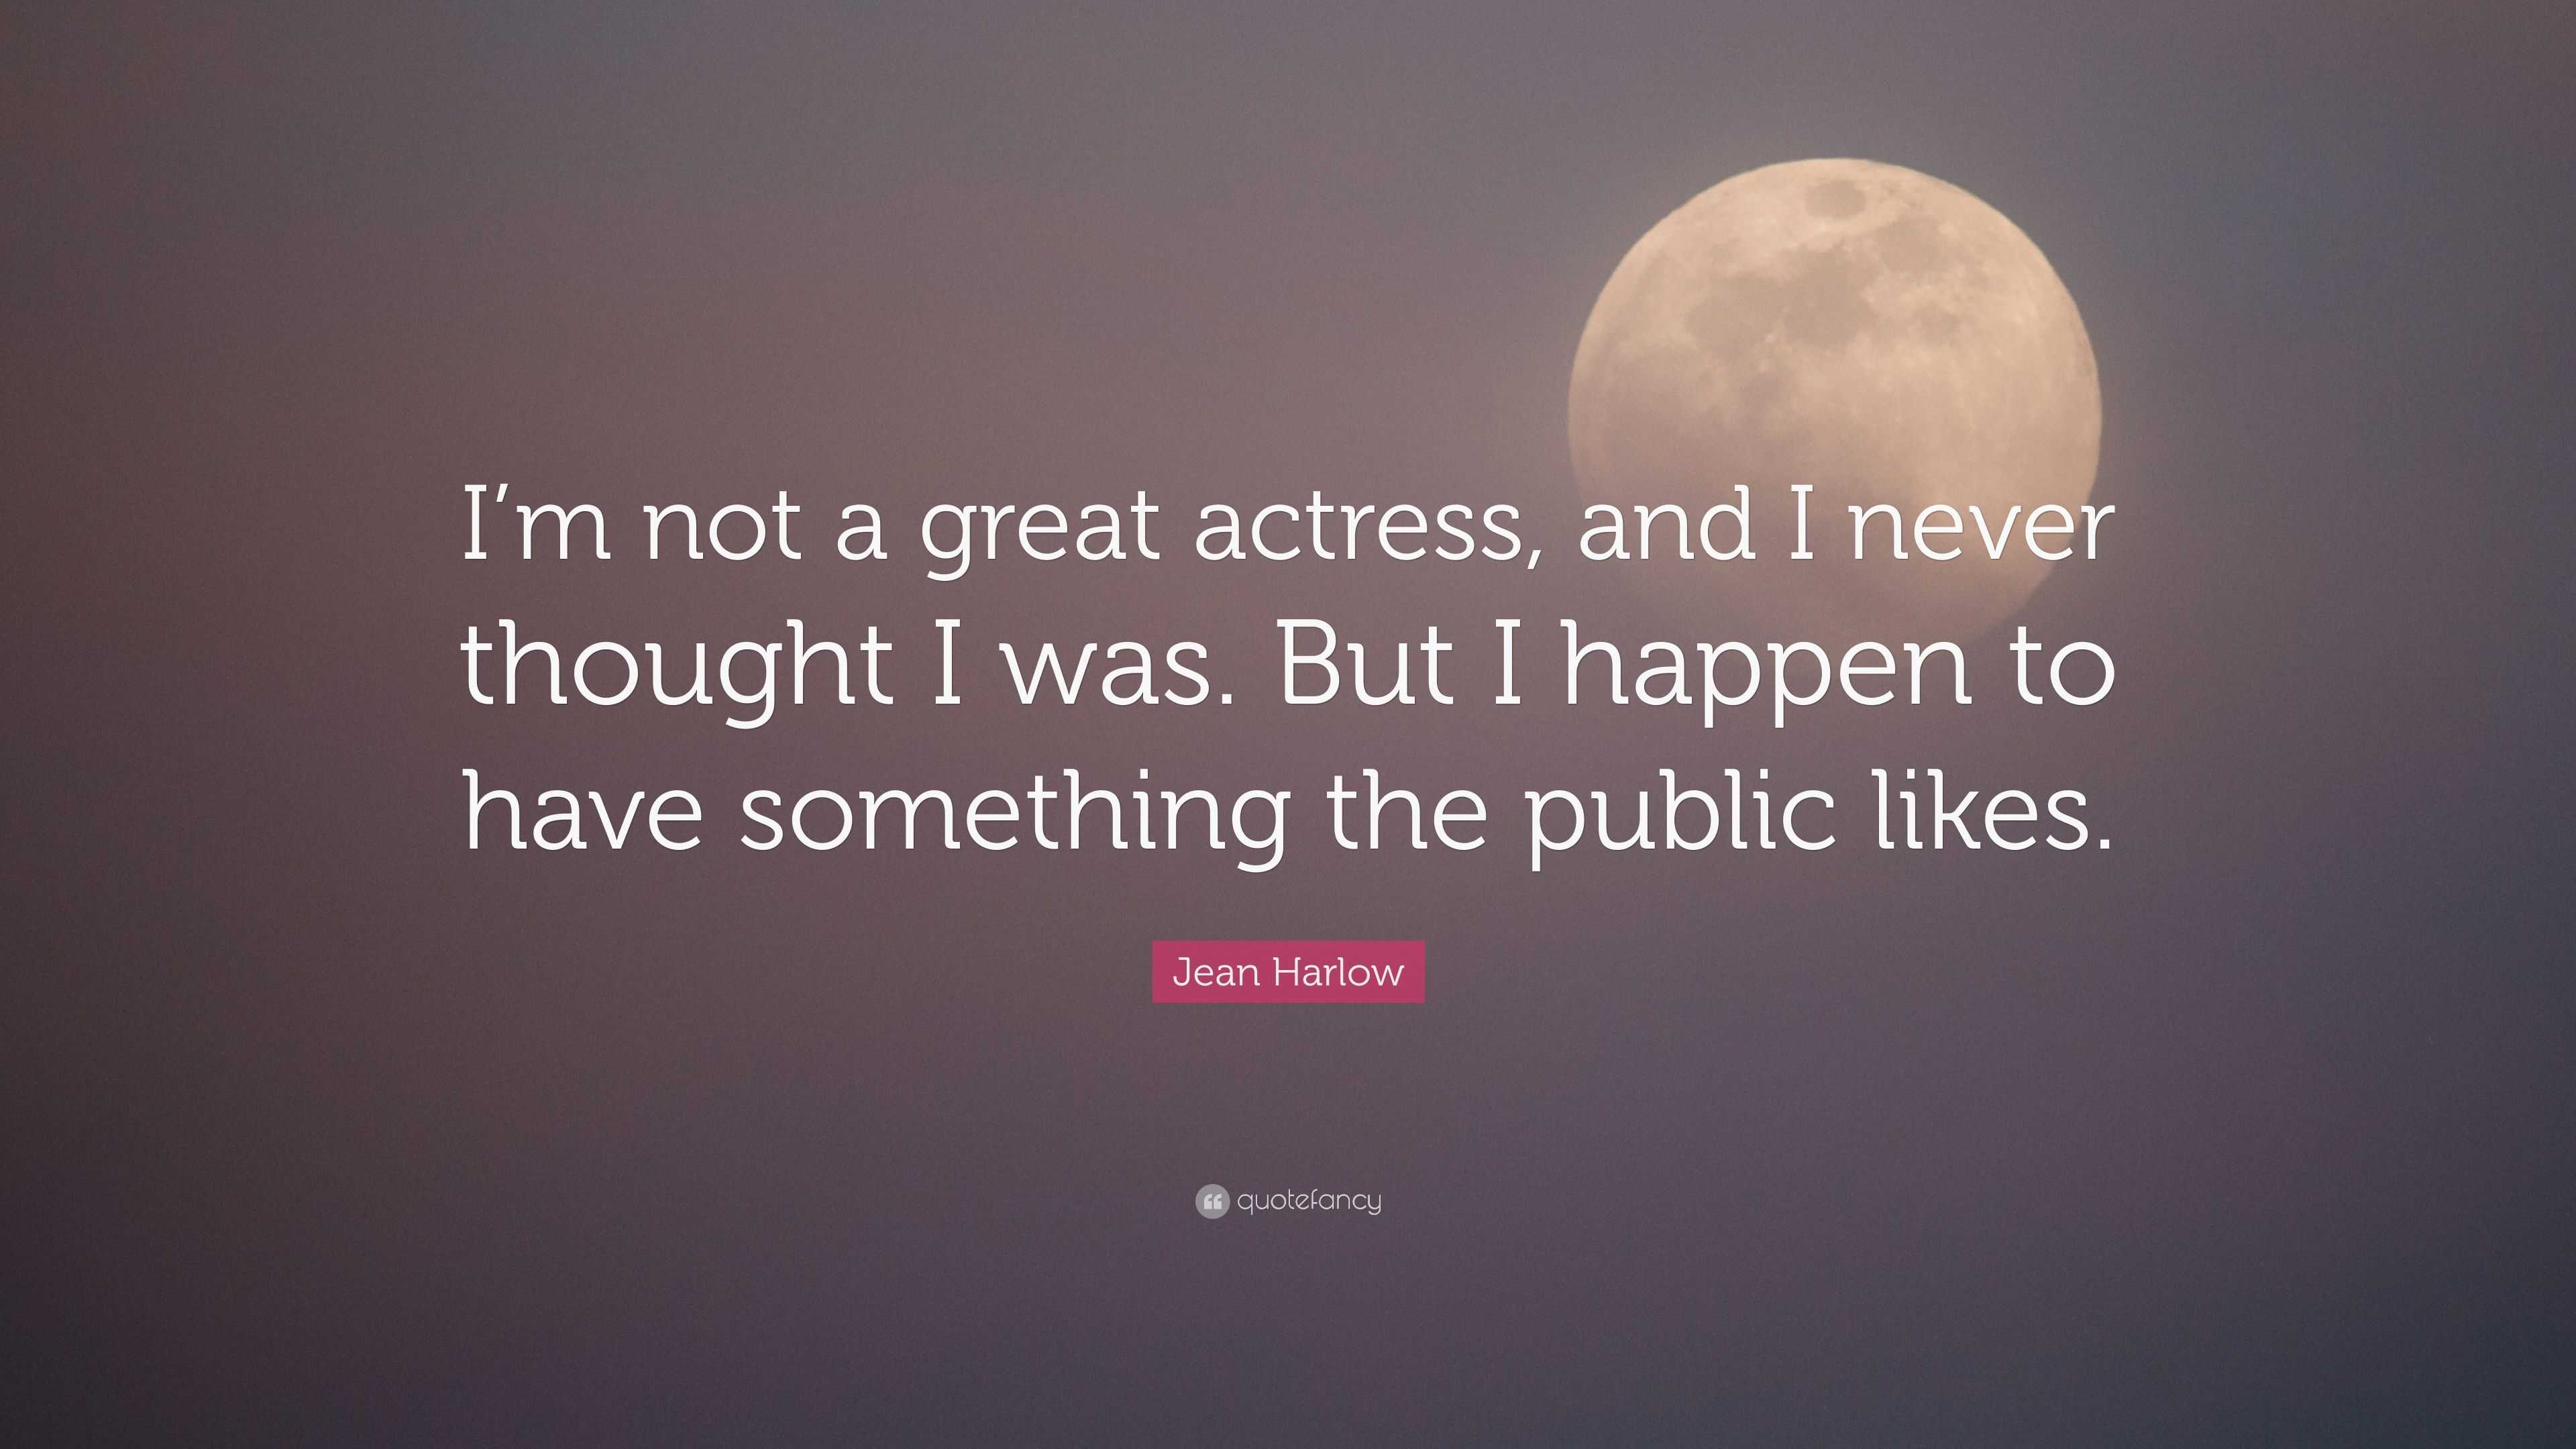 Jean Harlow Quote: “I’m not a great actress, and I never thought I was ...